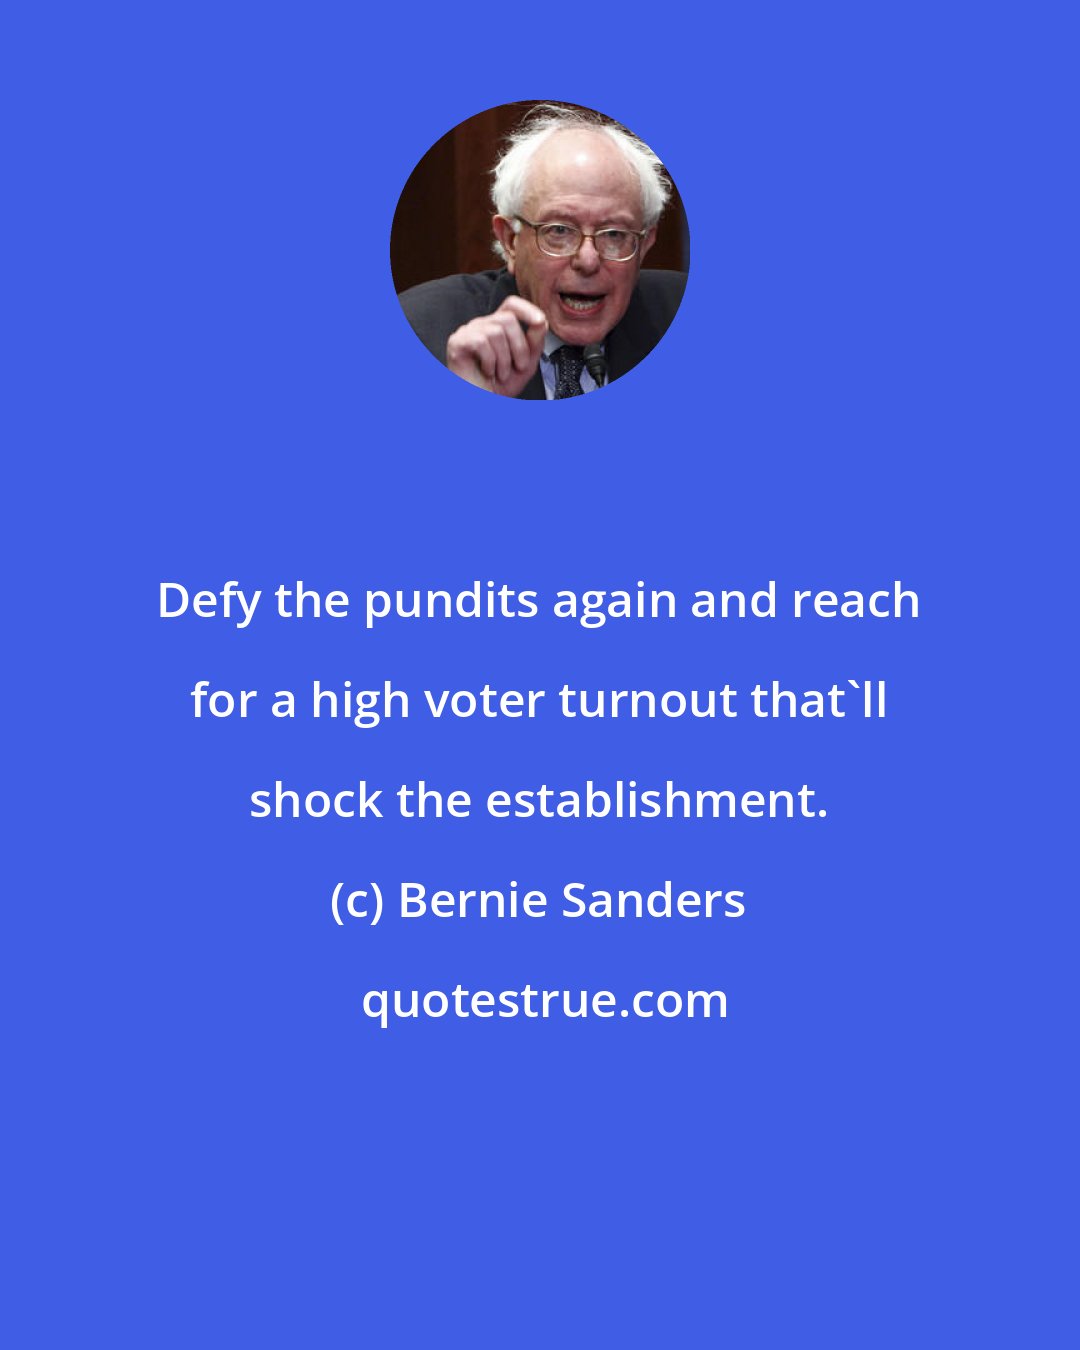 Bernie Sanders: Defy the pundits again and reach for a high voter turnout that'll shock the establishment.